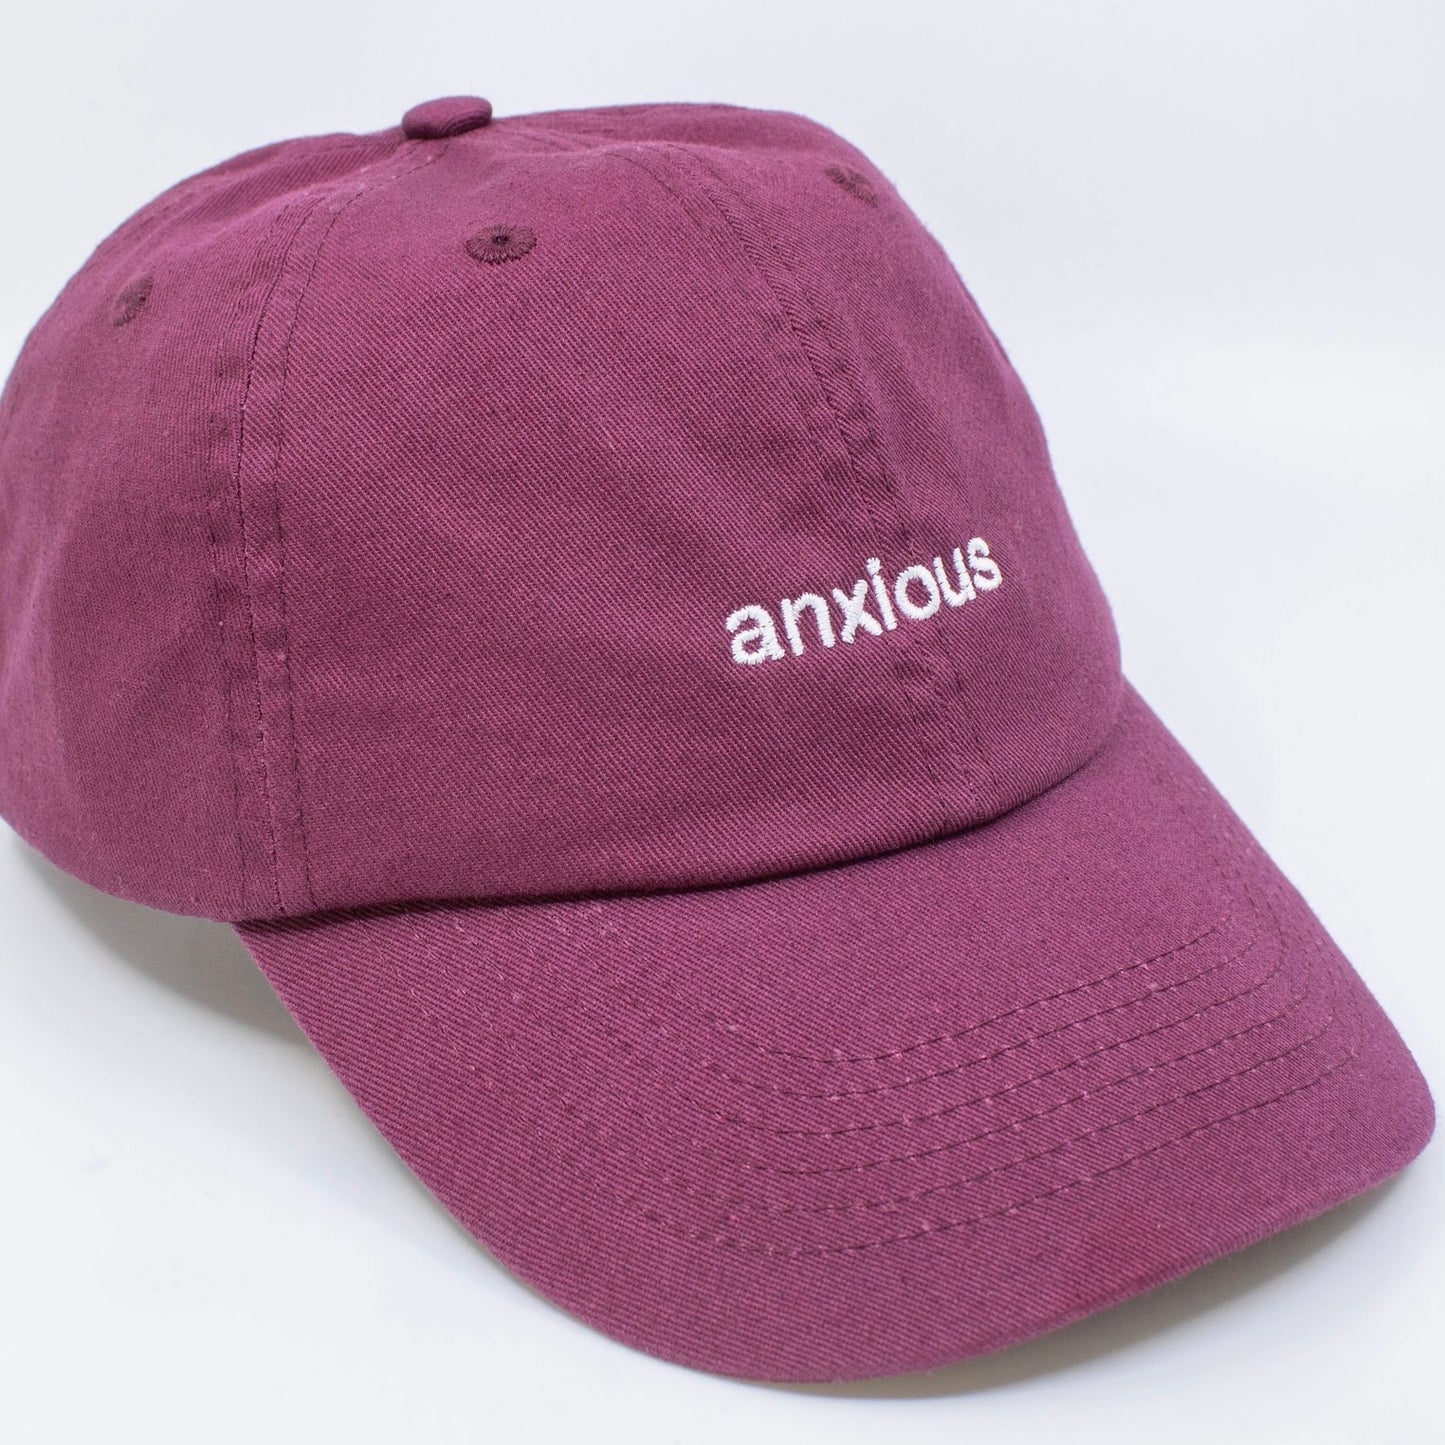 Cotton Embroidered Ball Cap Hats